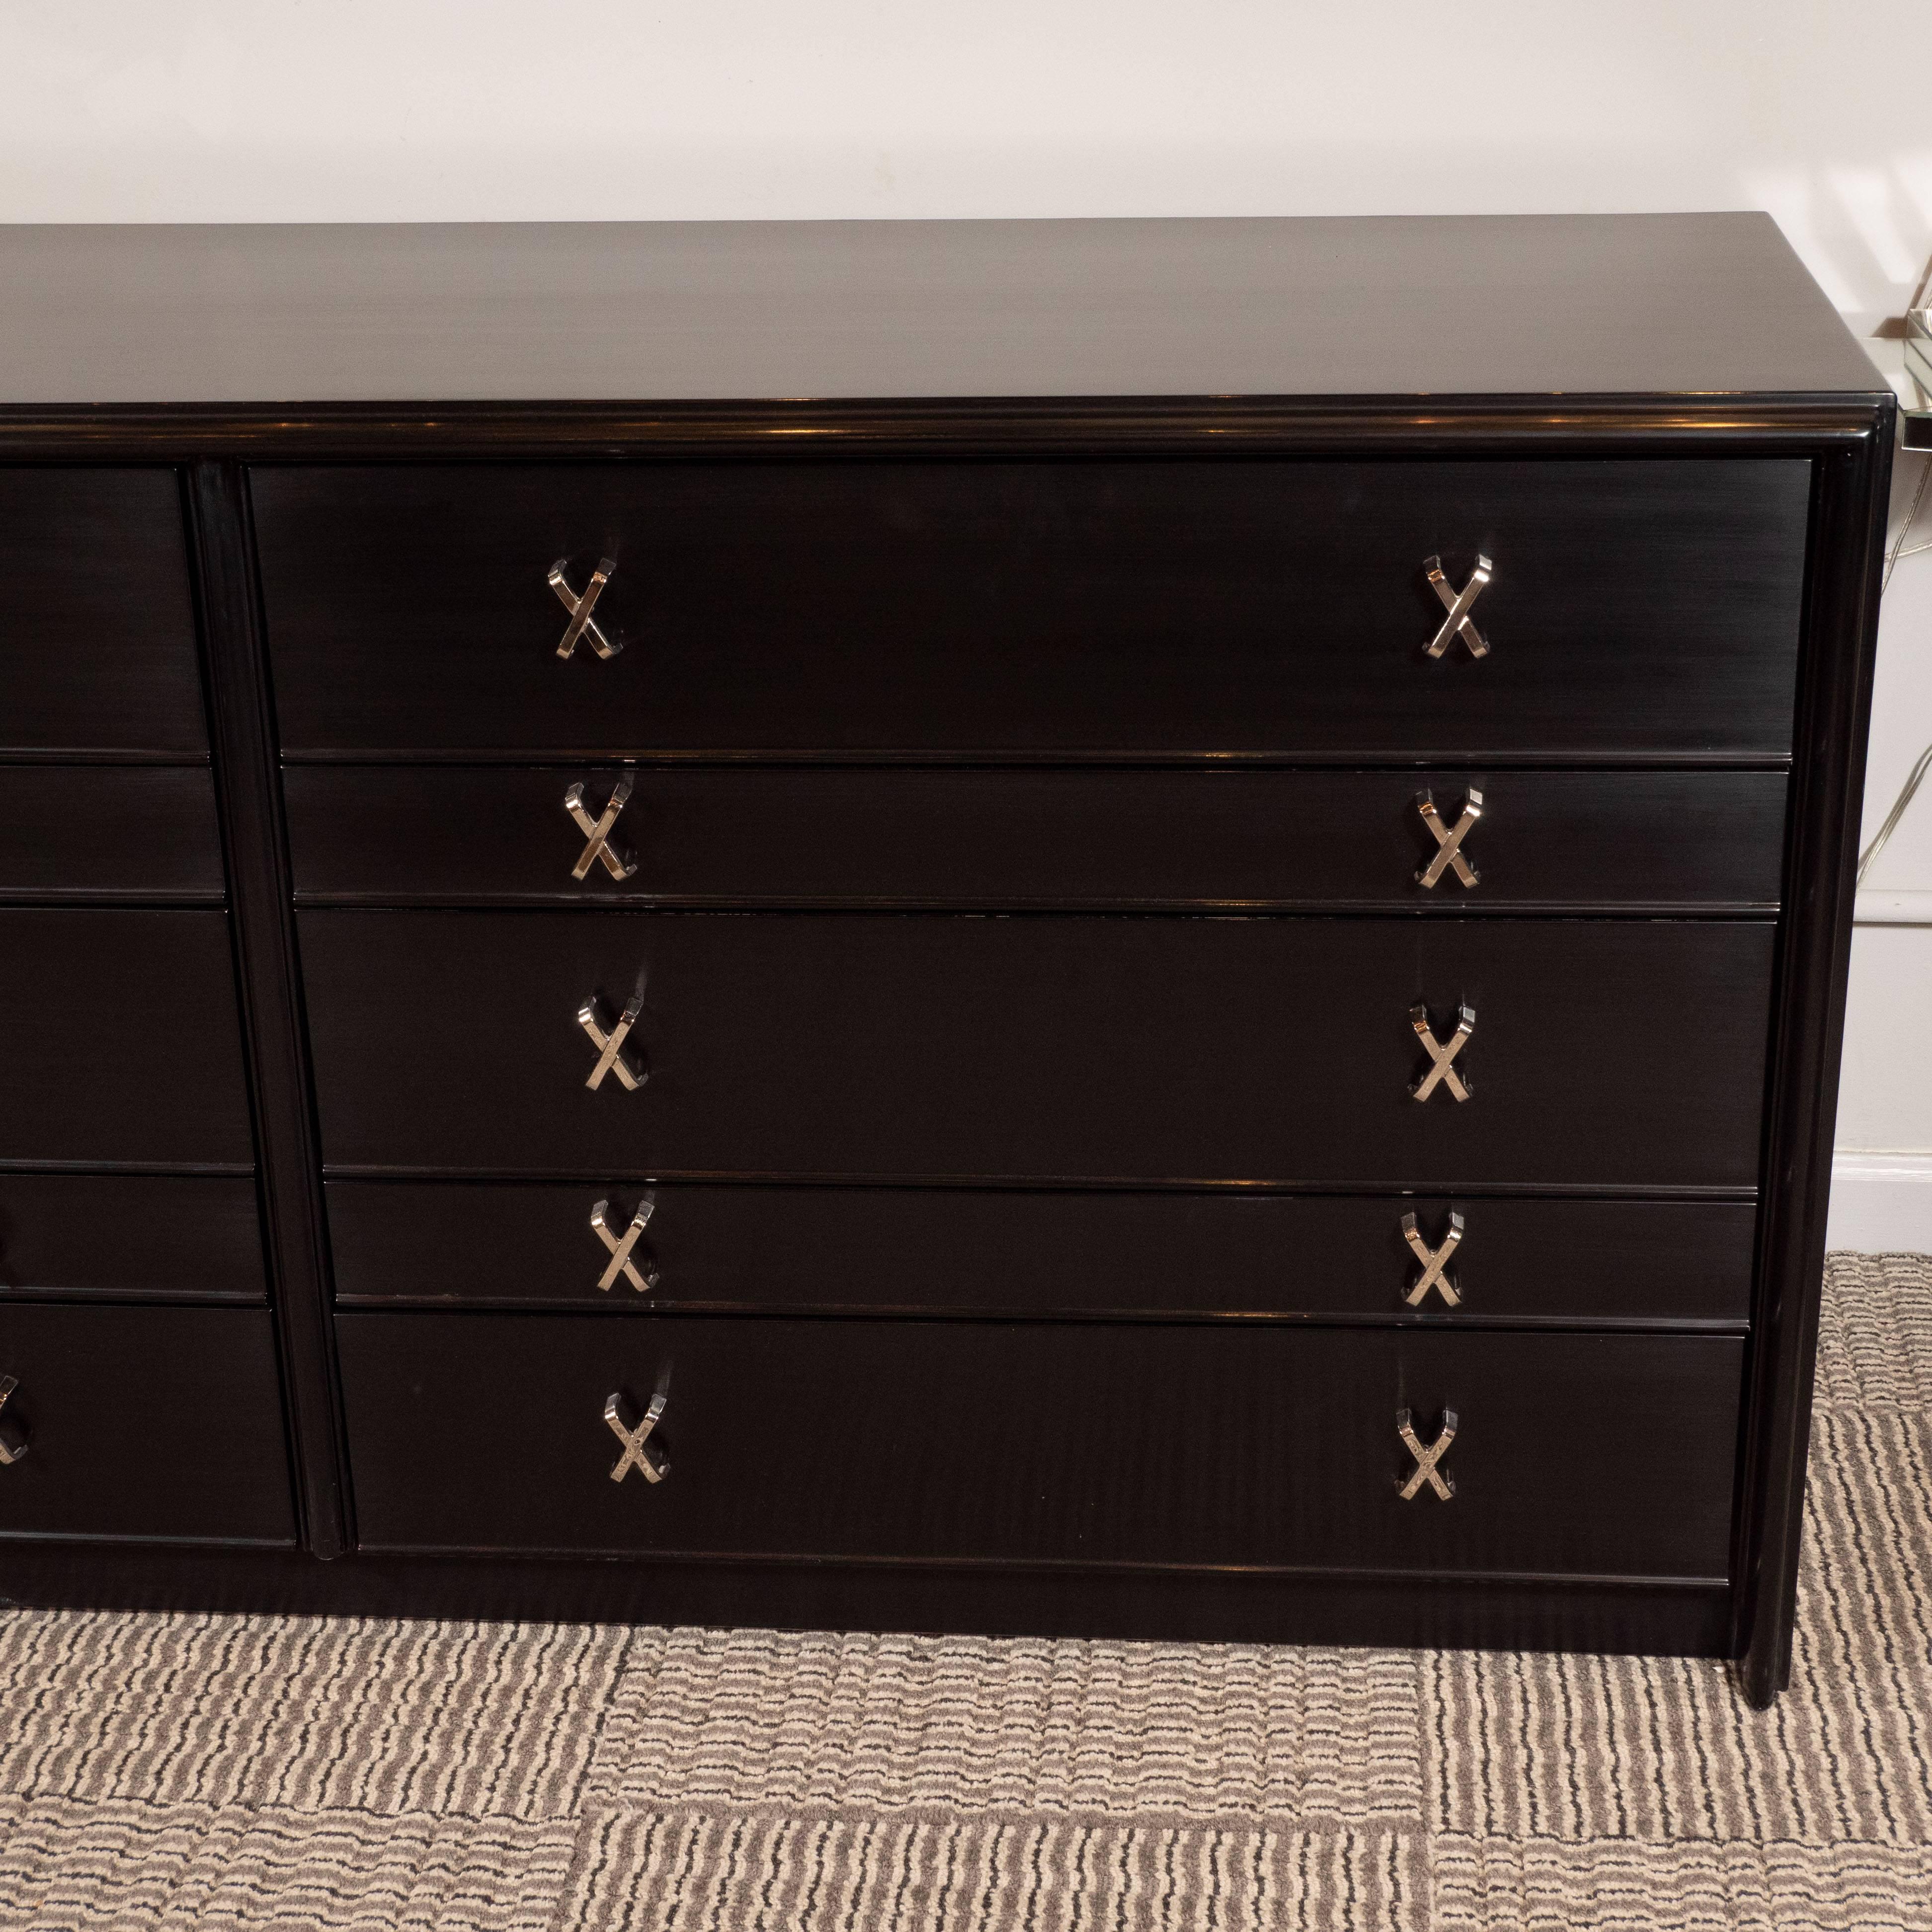 This stunning and elegant chest of drawers was realized by the fabled 20th century designer, Paul Frankl, for John Stuart Inc., circa 1950. It features ten drawers- three taller and two shorter with three compartments in each. The drawers feature a